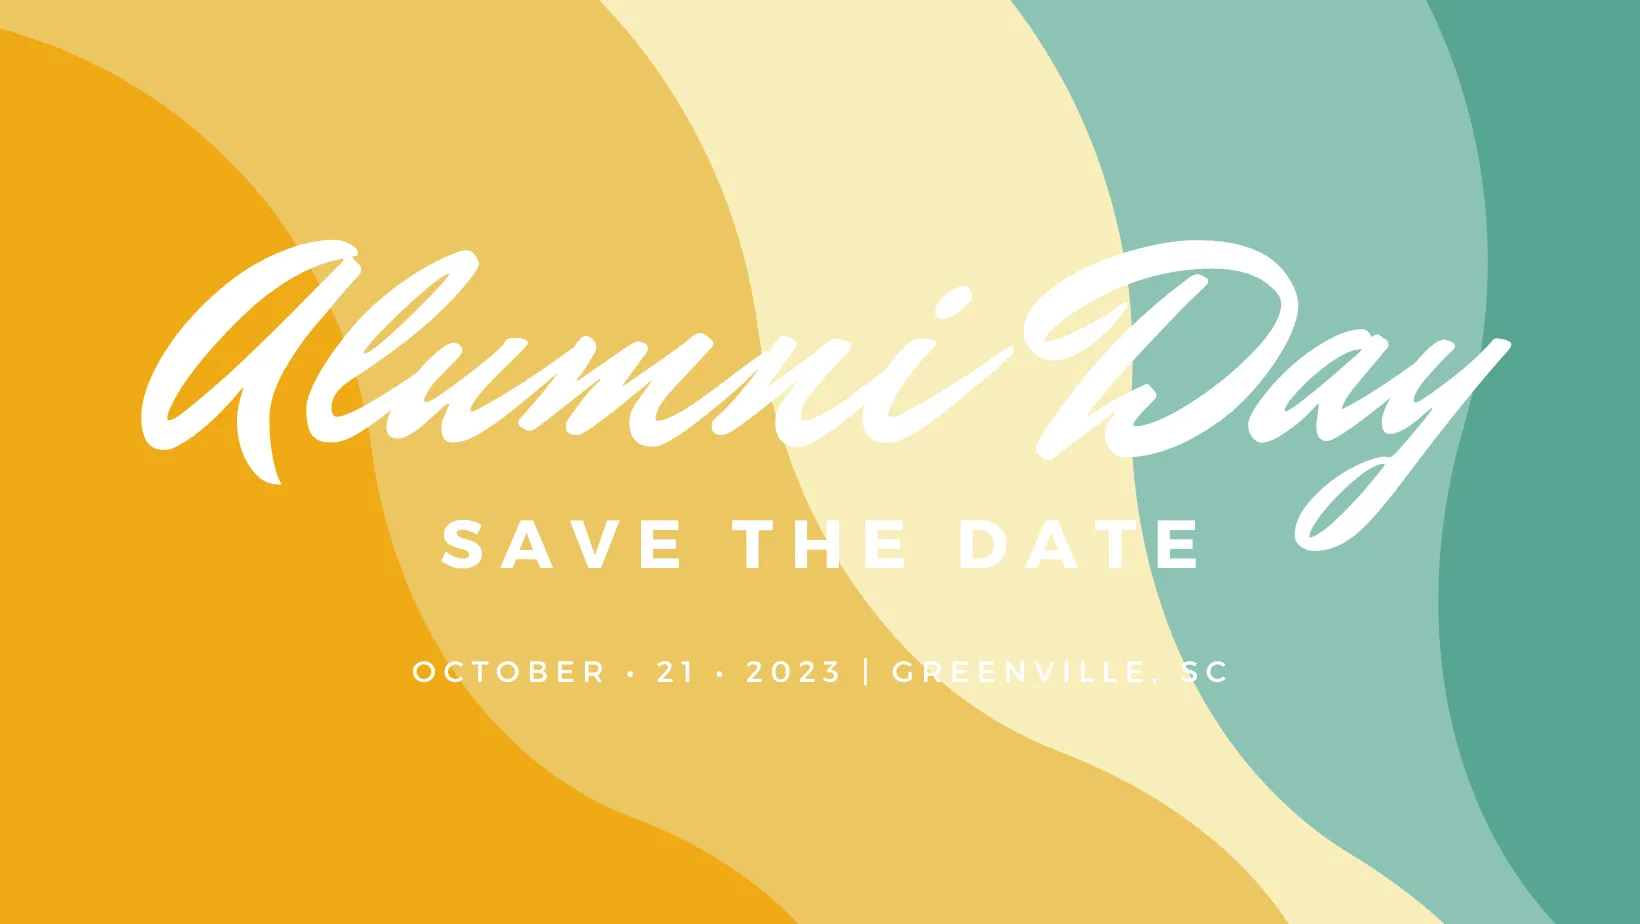 Alumni Day- Save the Date - October 21, 2023